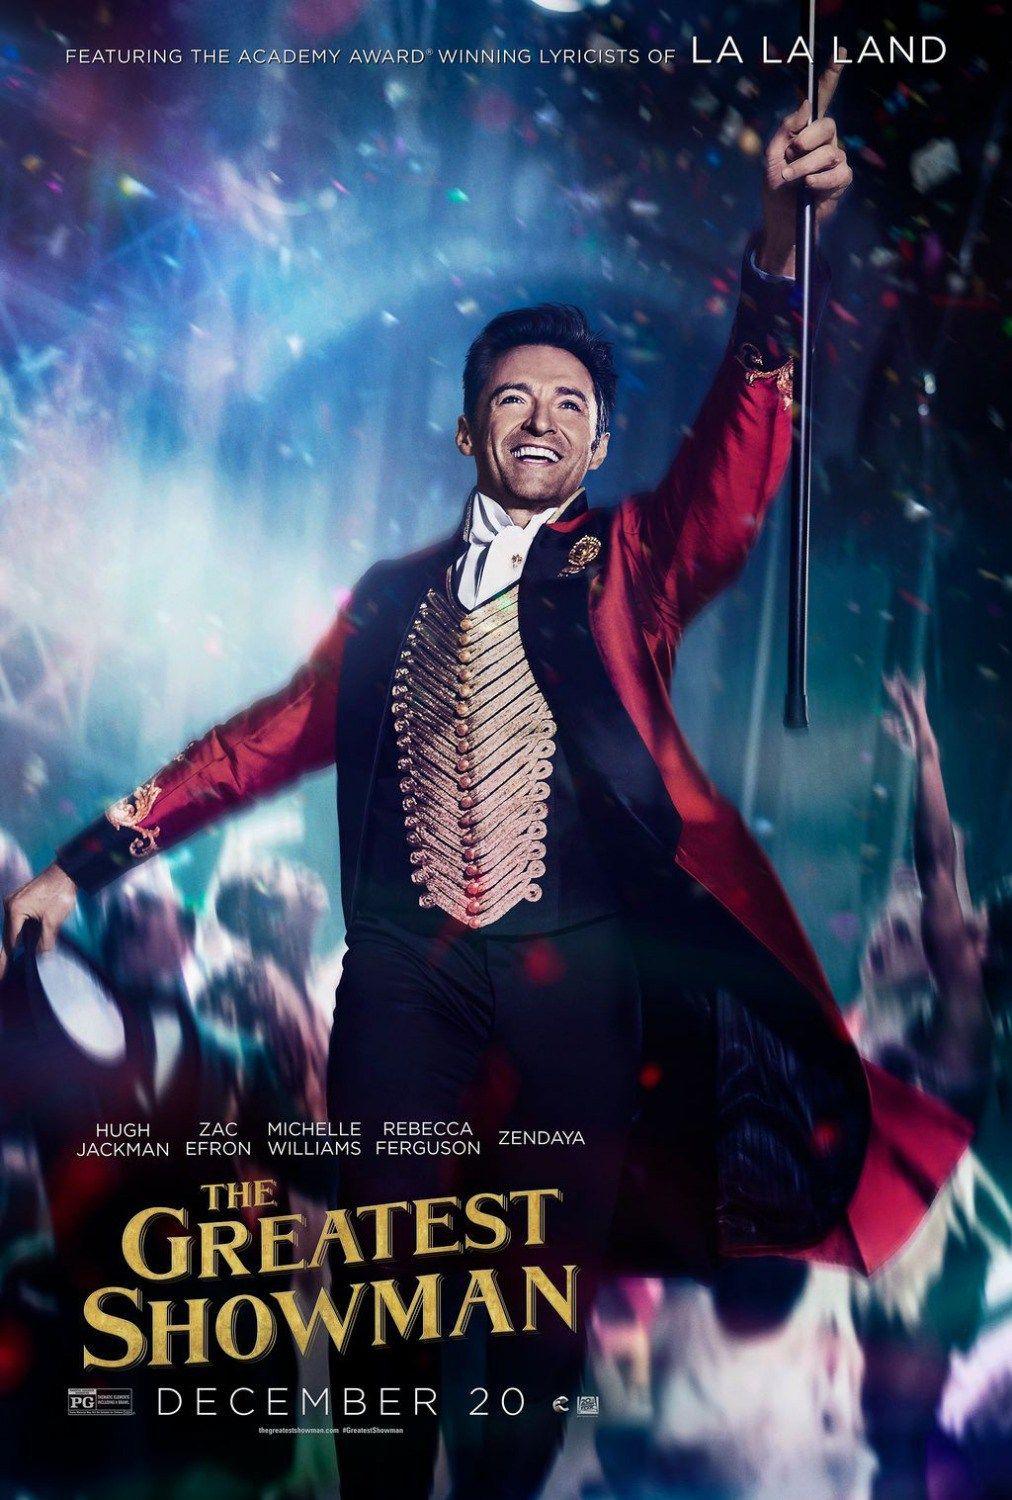 The Greatest Showman Movie Character Posters, Teaser Trailer